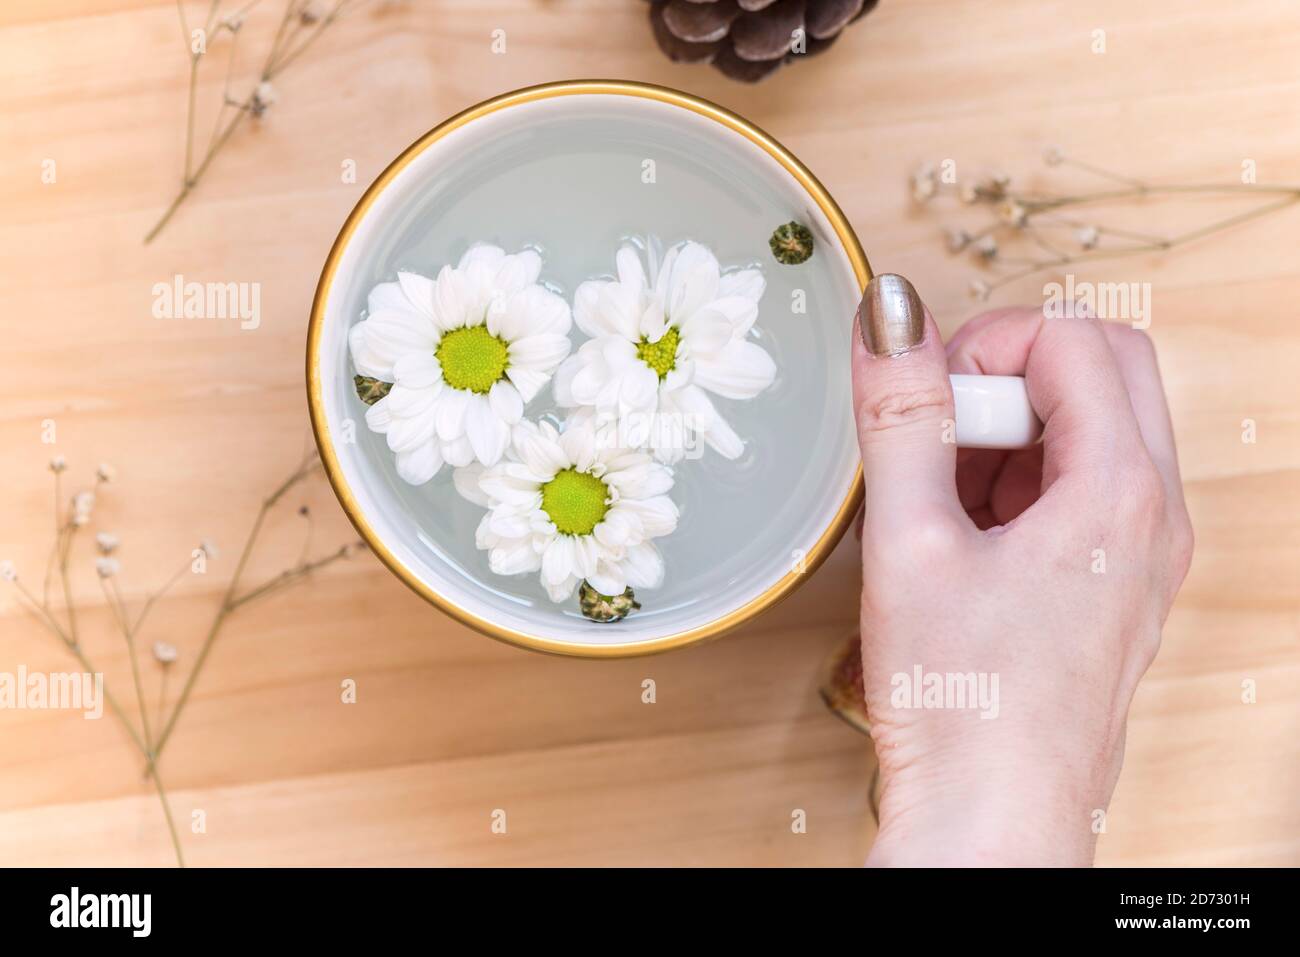 Hands of an Old Woman Holding Daisy Flowers. the Concept of Longevity.  Seniors Day Stock Image - Image of seniors, wrinkled: 159510259